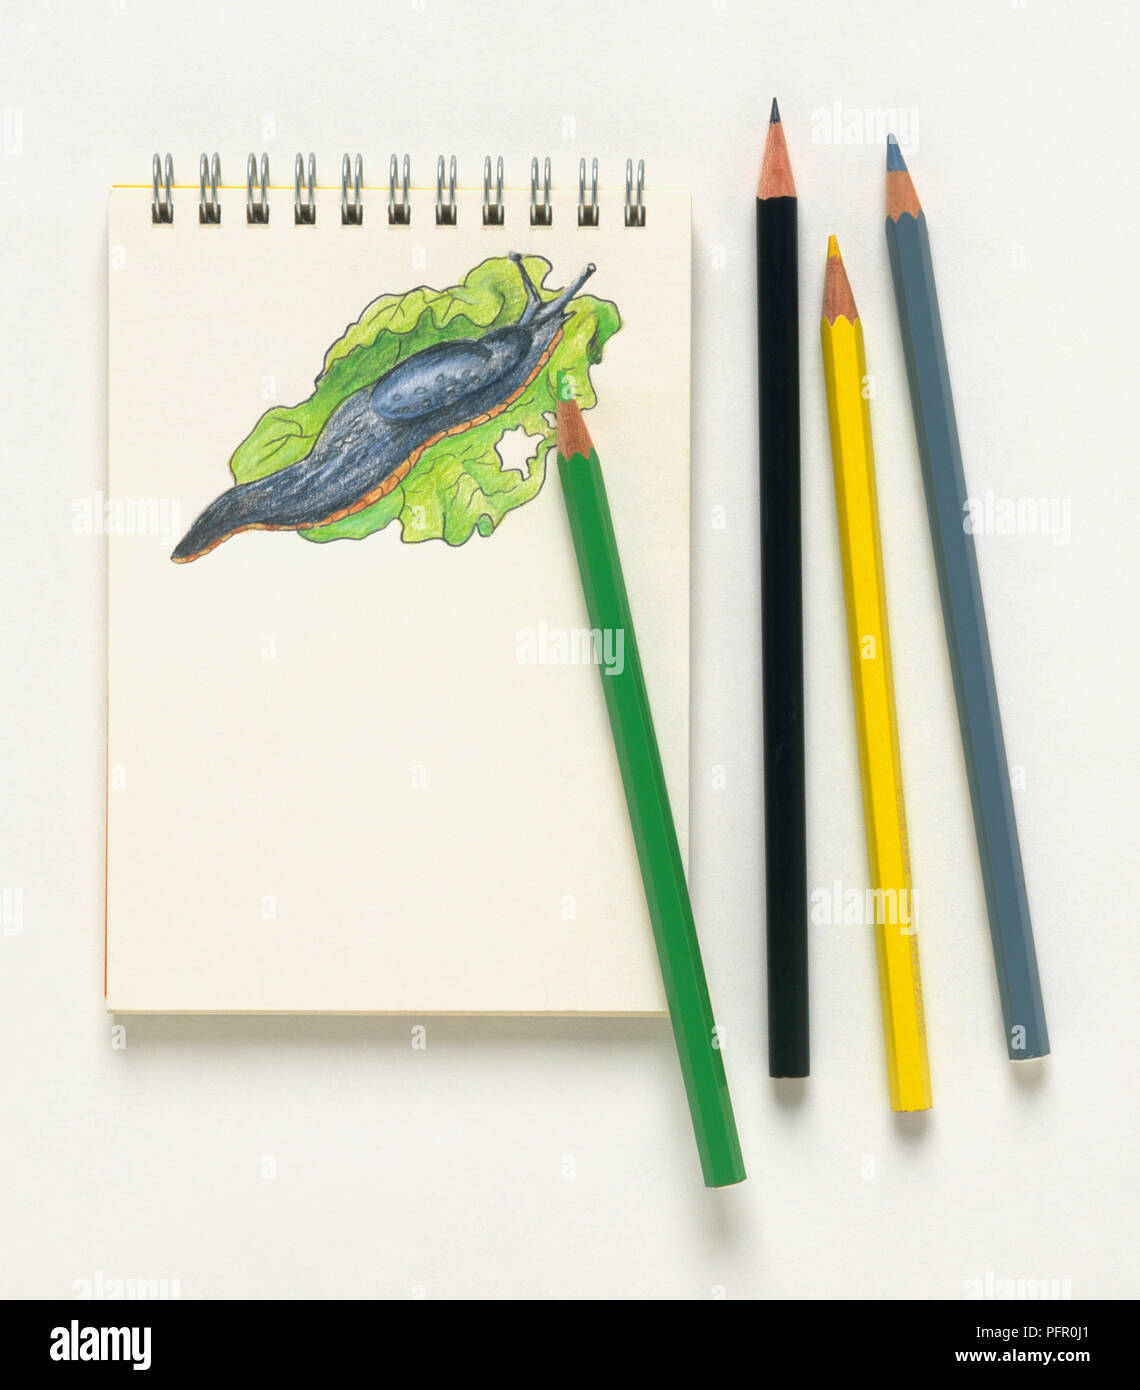 Notepad with drawing of slug and coloured pencils Stock Photo